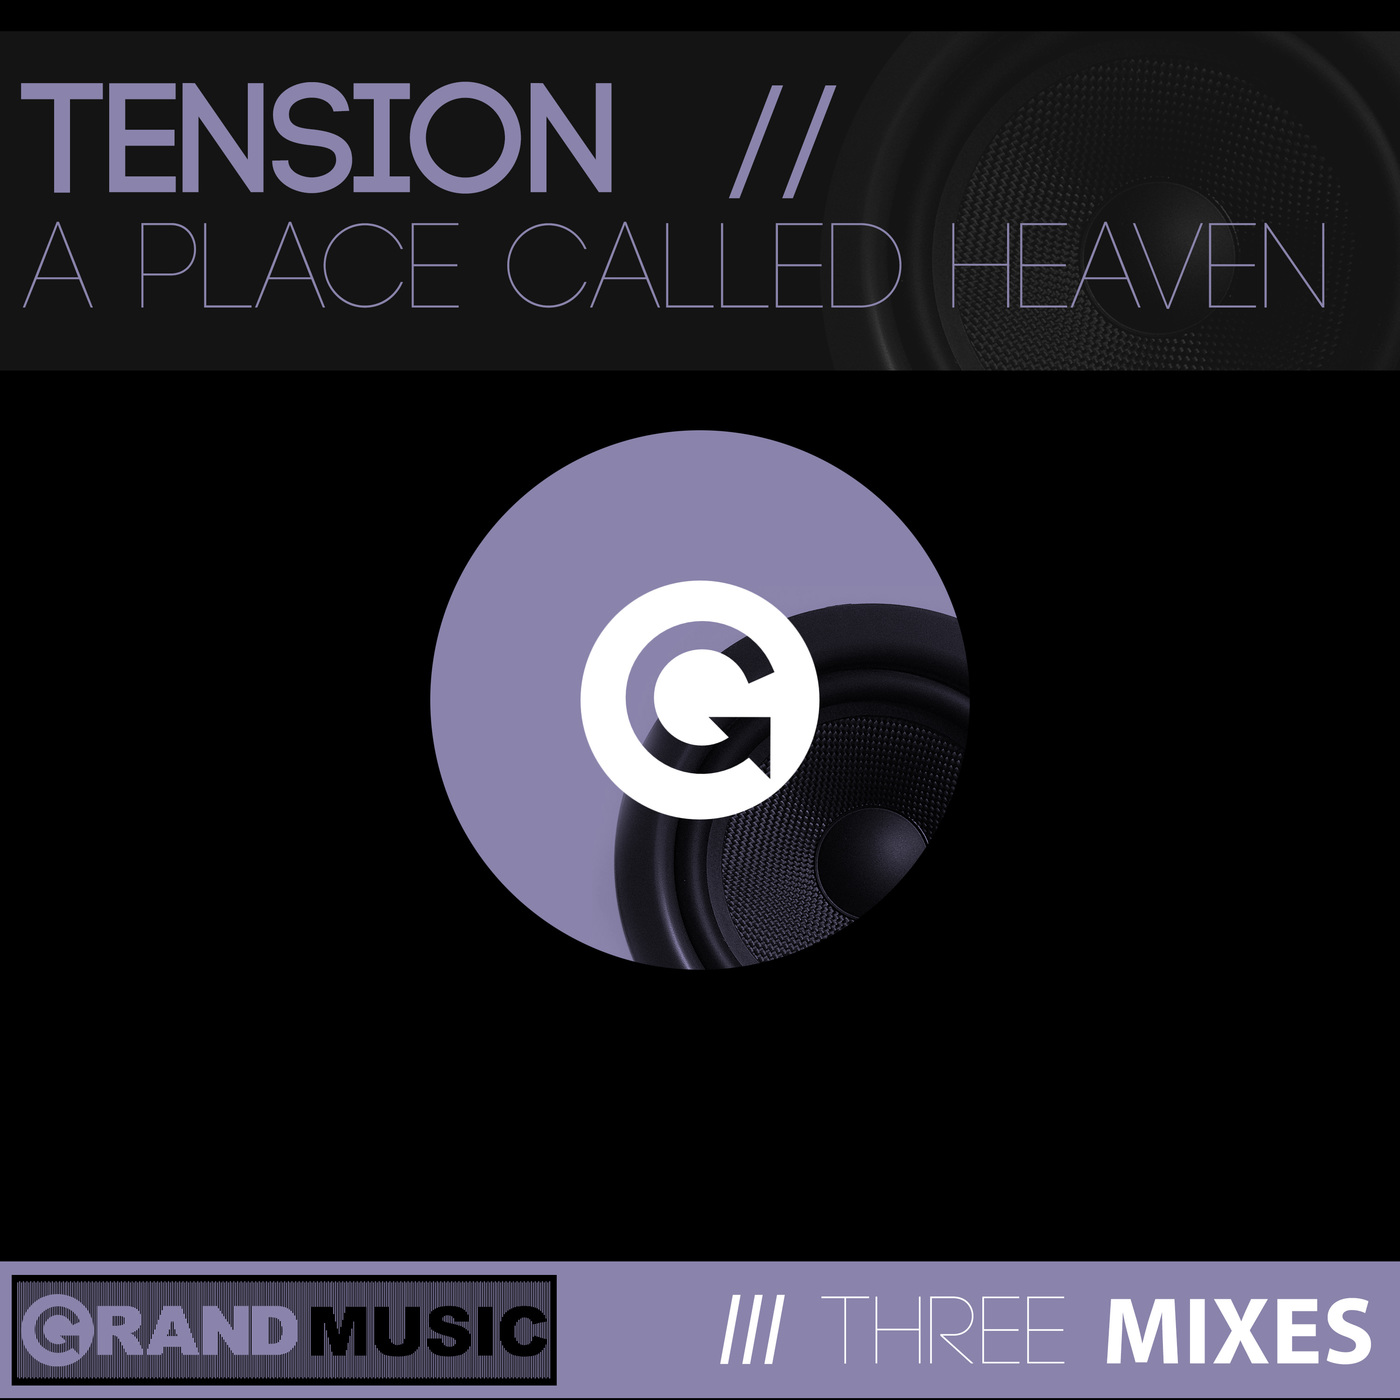 Tension - A Place Called Heaven / GRAND Music